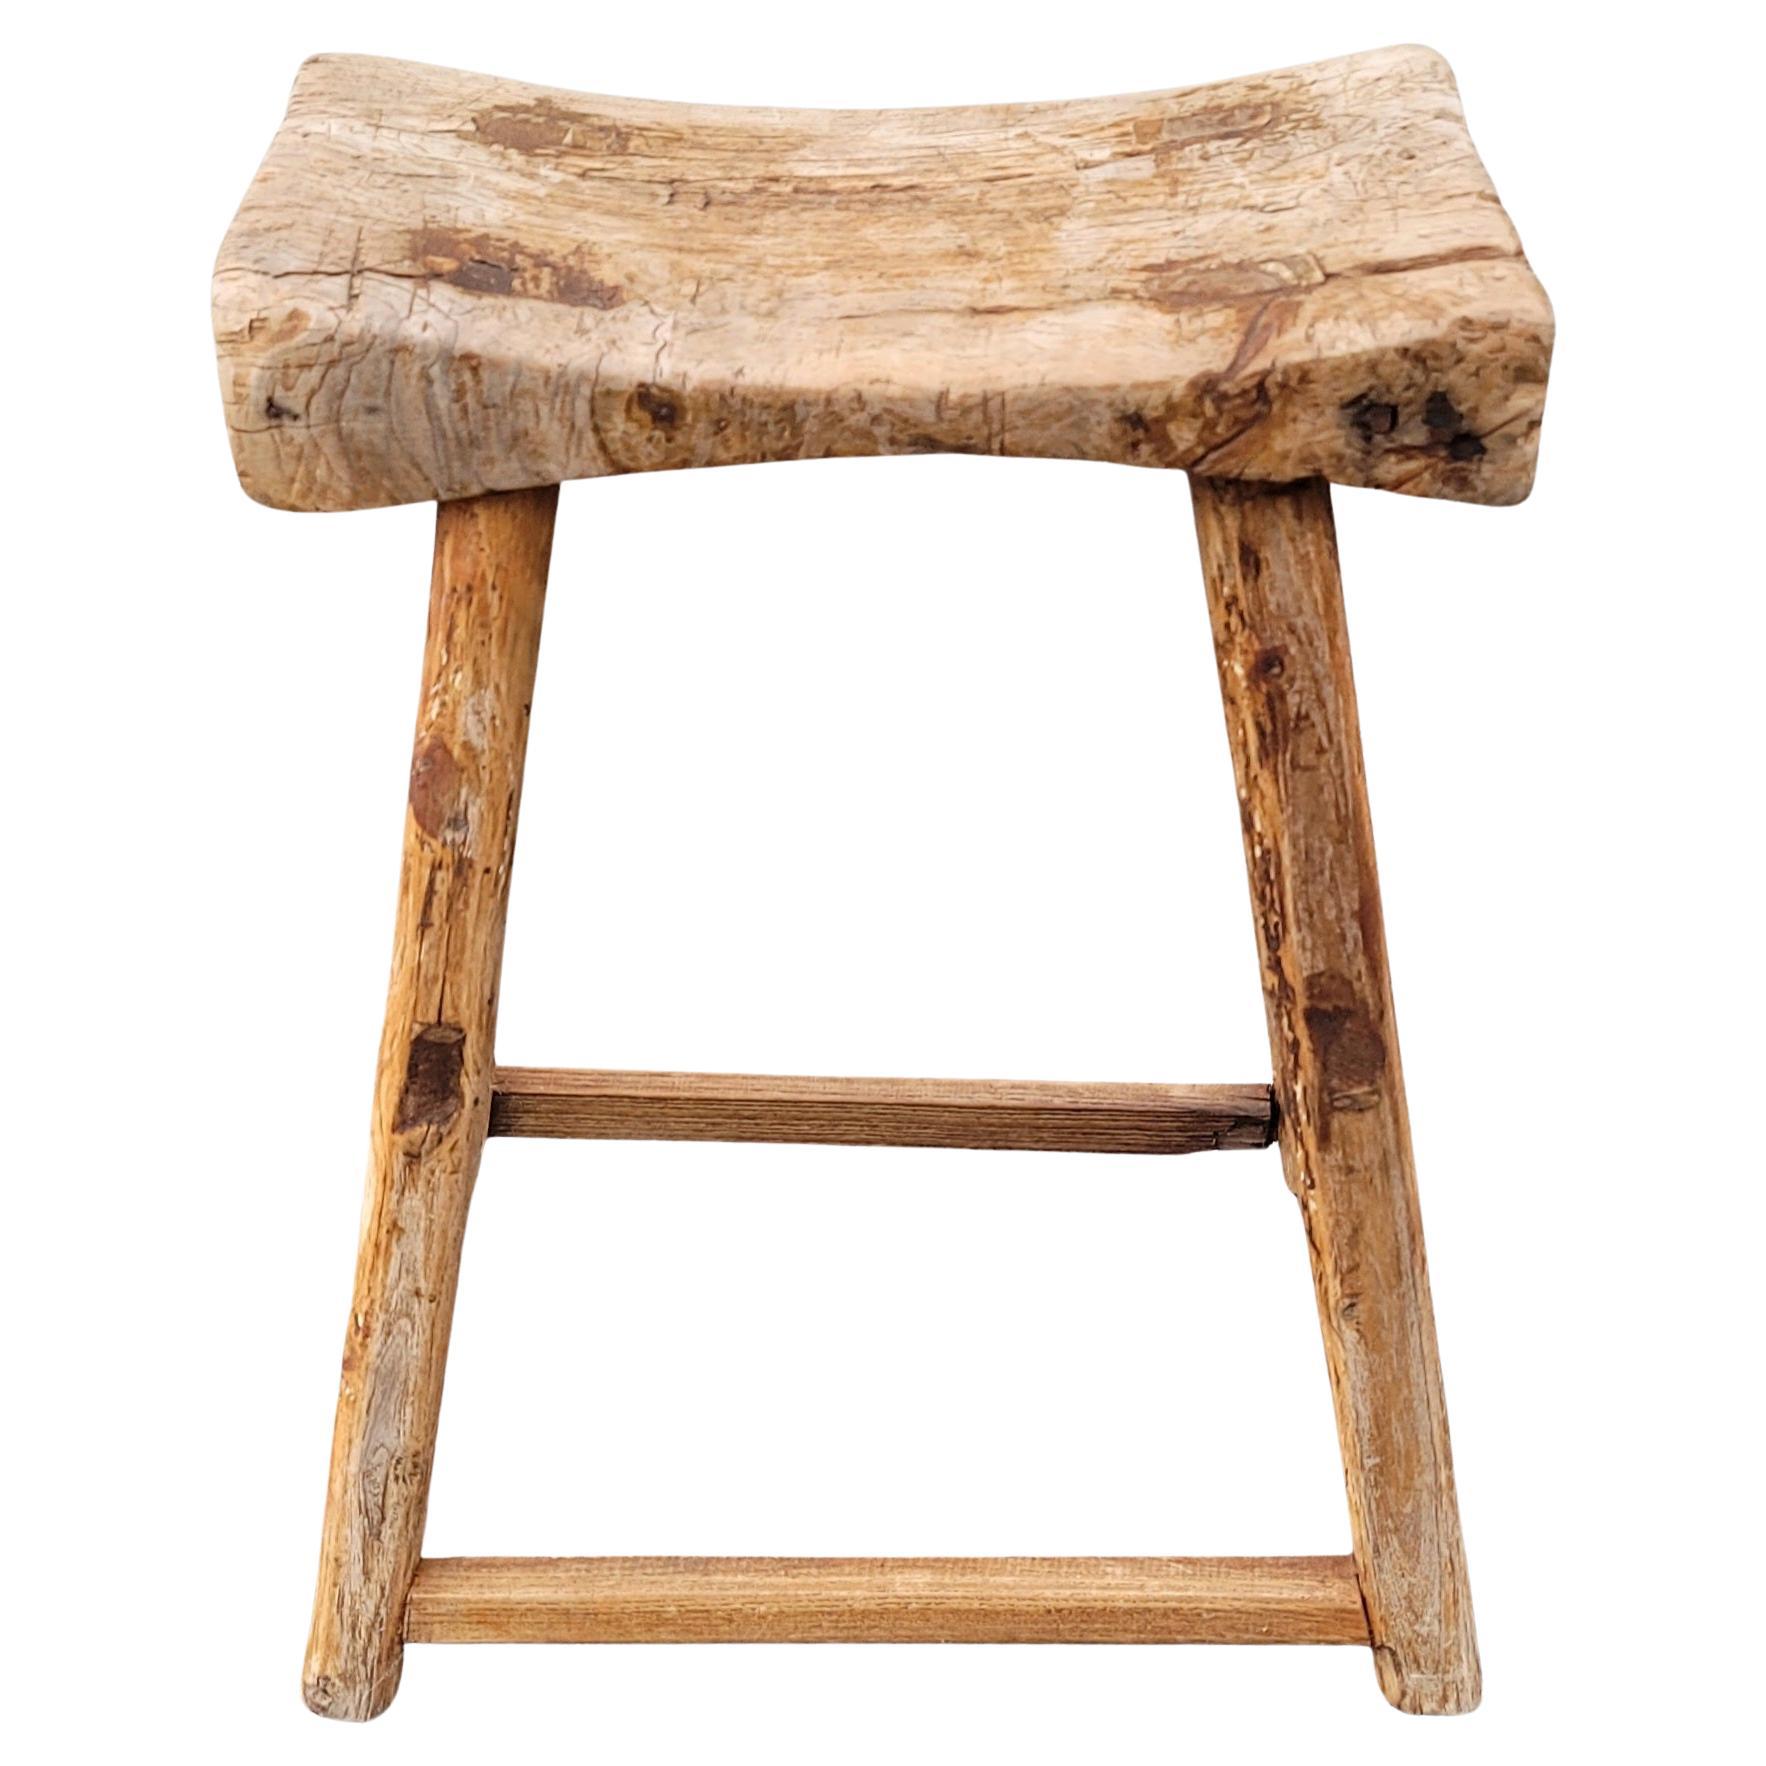 19th Century Chinese Elm Rustic Farmhouse Primitive Brutalist Stool For Sale 1